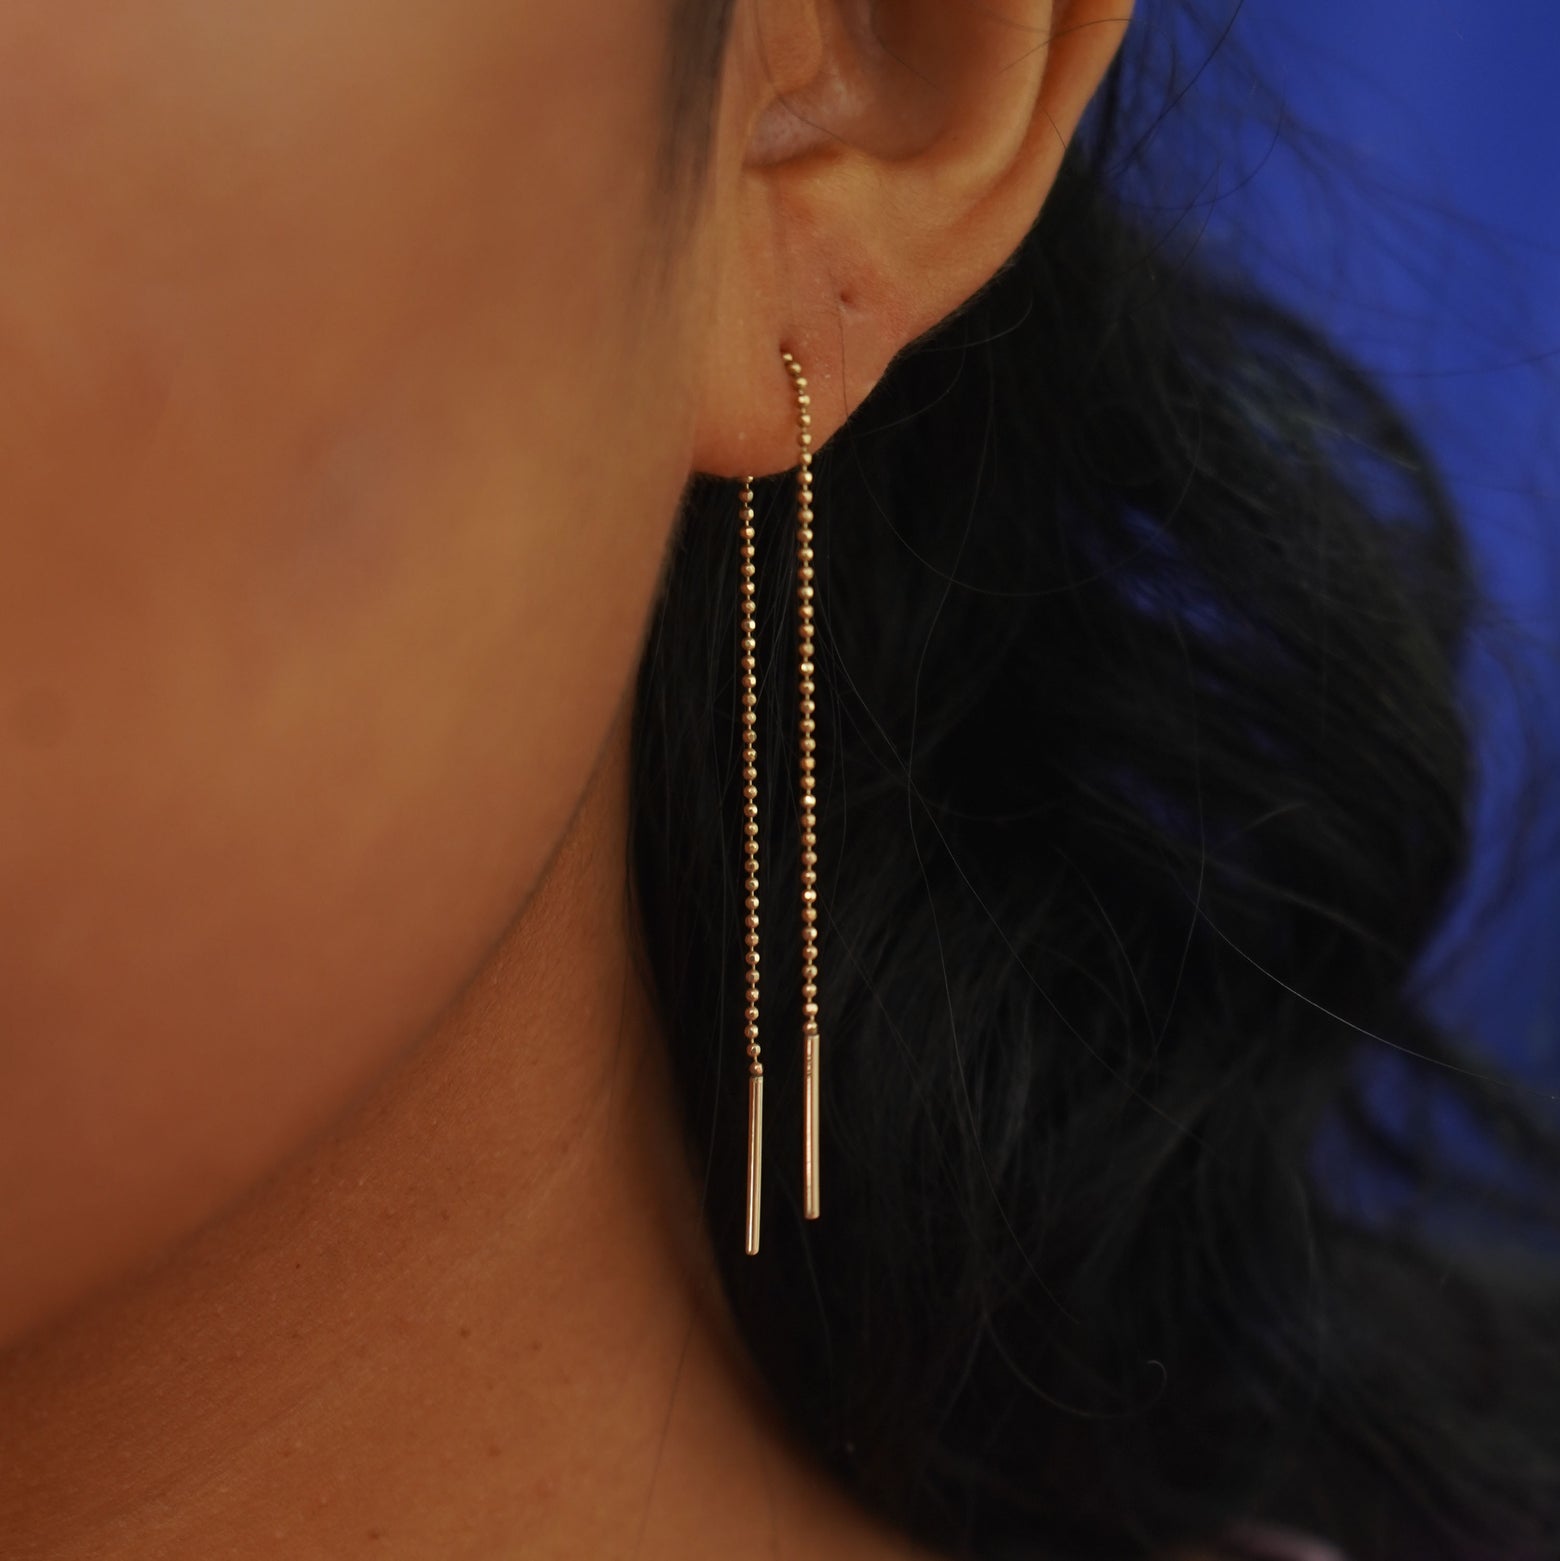 Close up view of a model's ear wearing with a yellow gold Threader dangling through a single lobe piercing